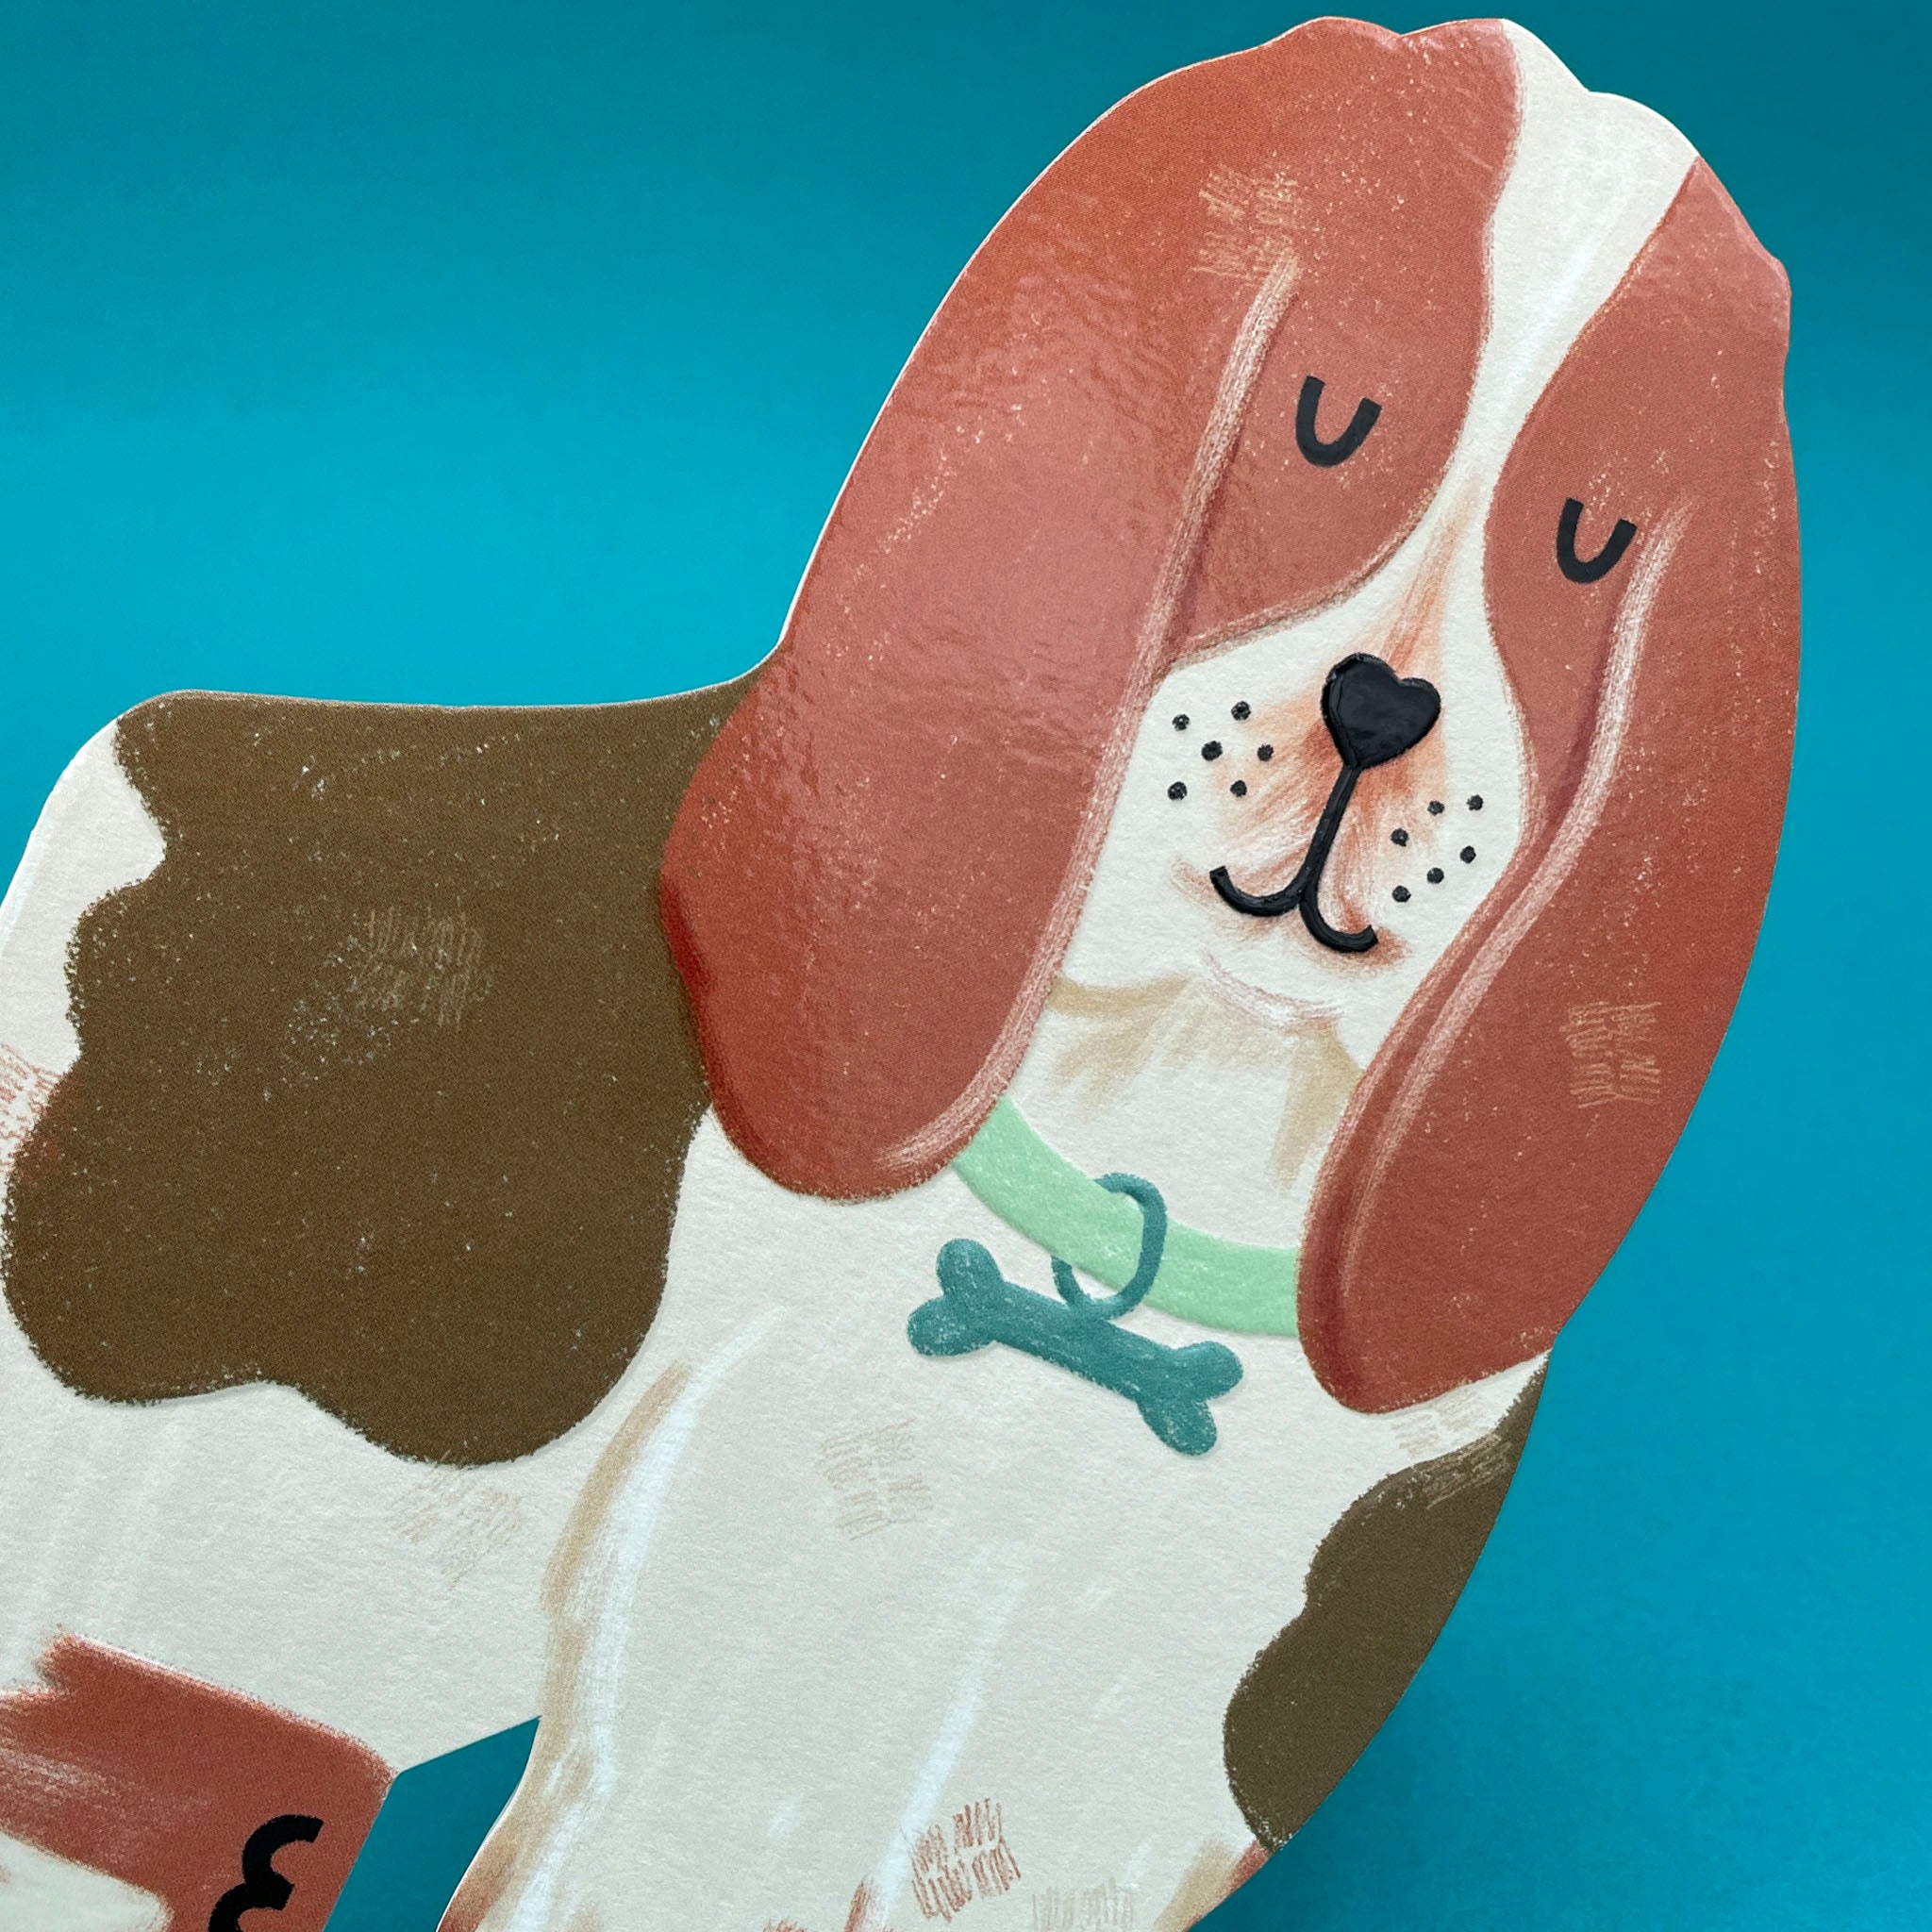 A close up of the Basett Hound cut out card. The dog has a blue collar with a bone shaped pendant. The card is above a mint coloured envelope.